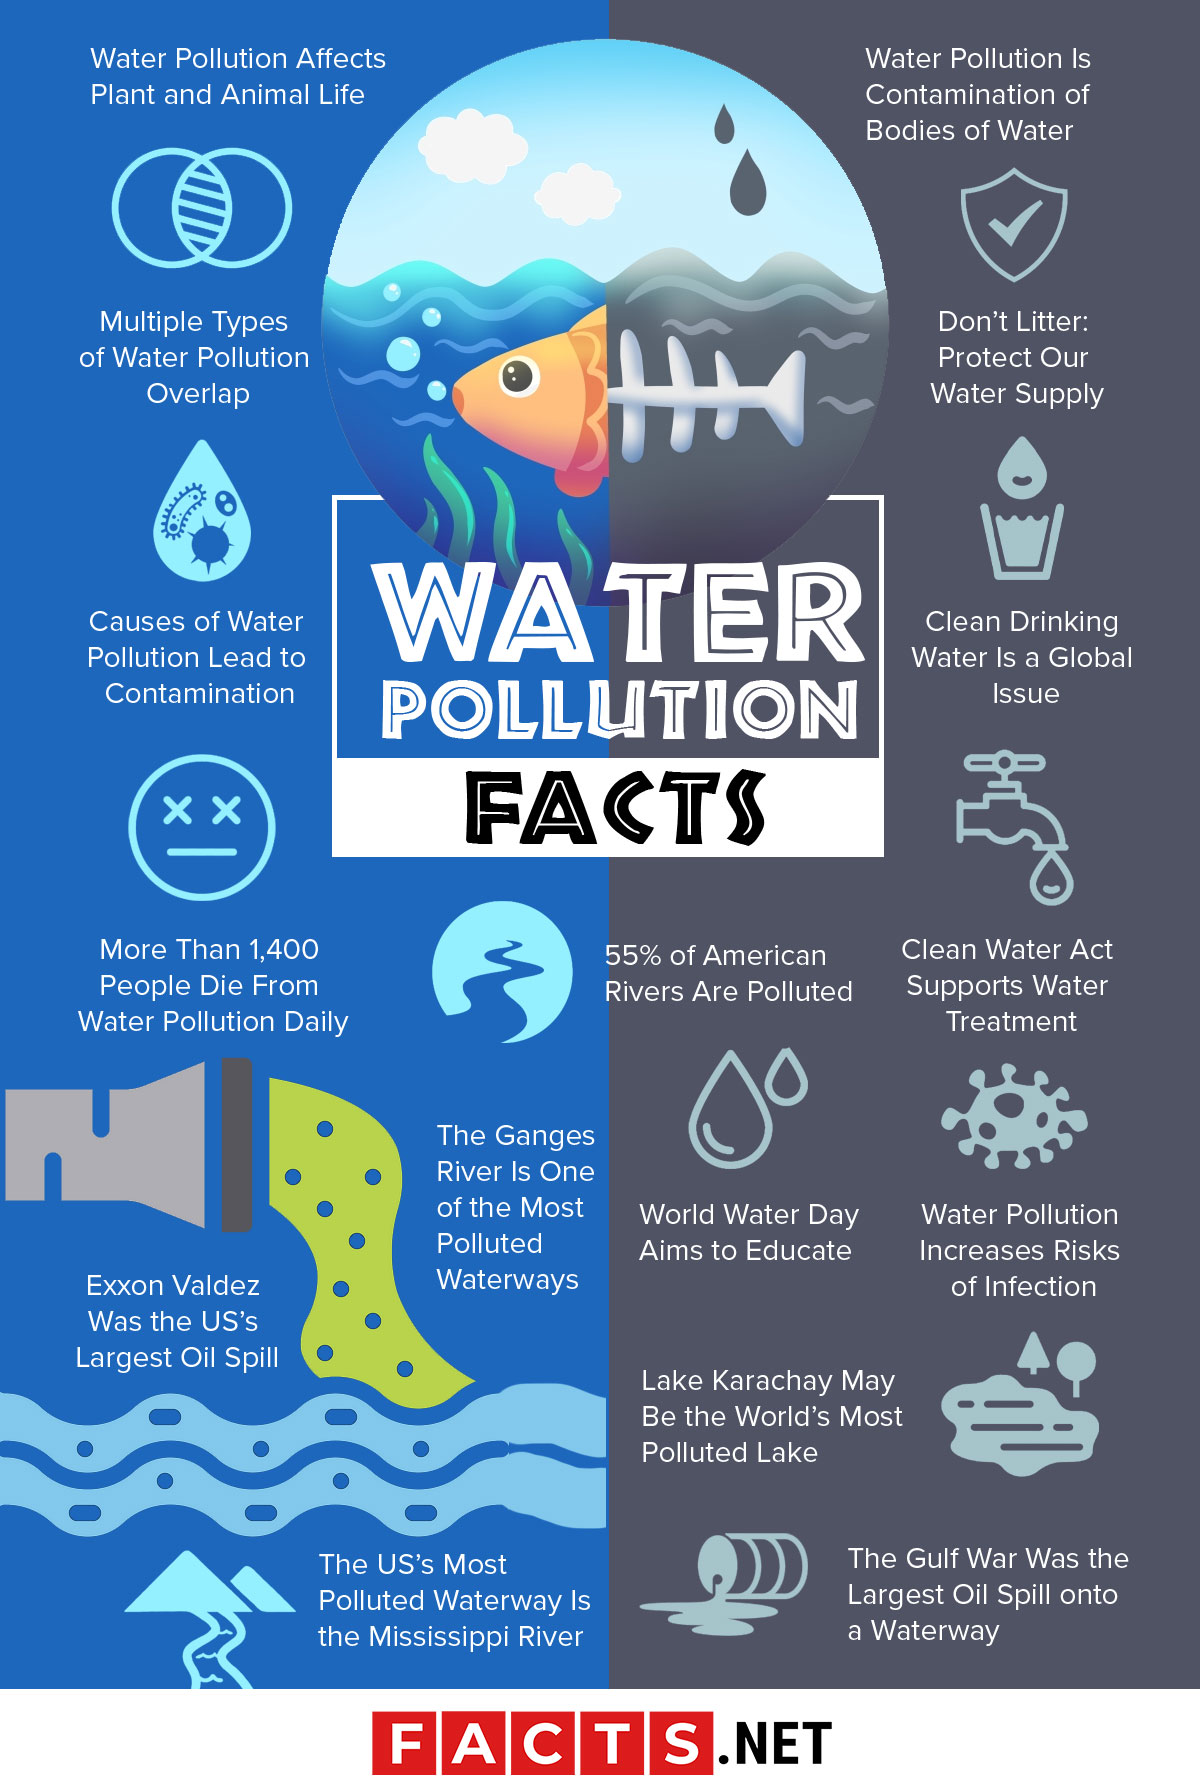 Water Pollution Facts Causes, Effects & More